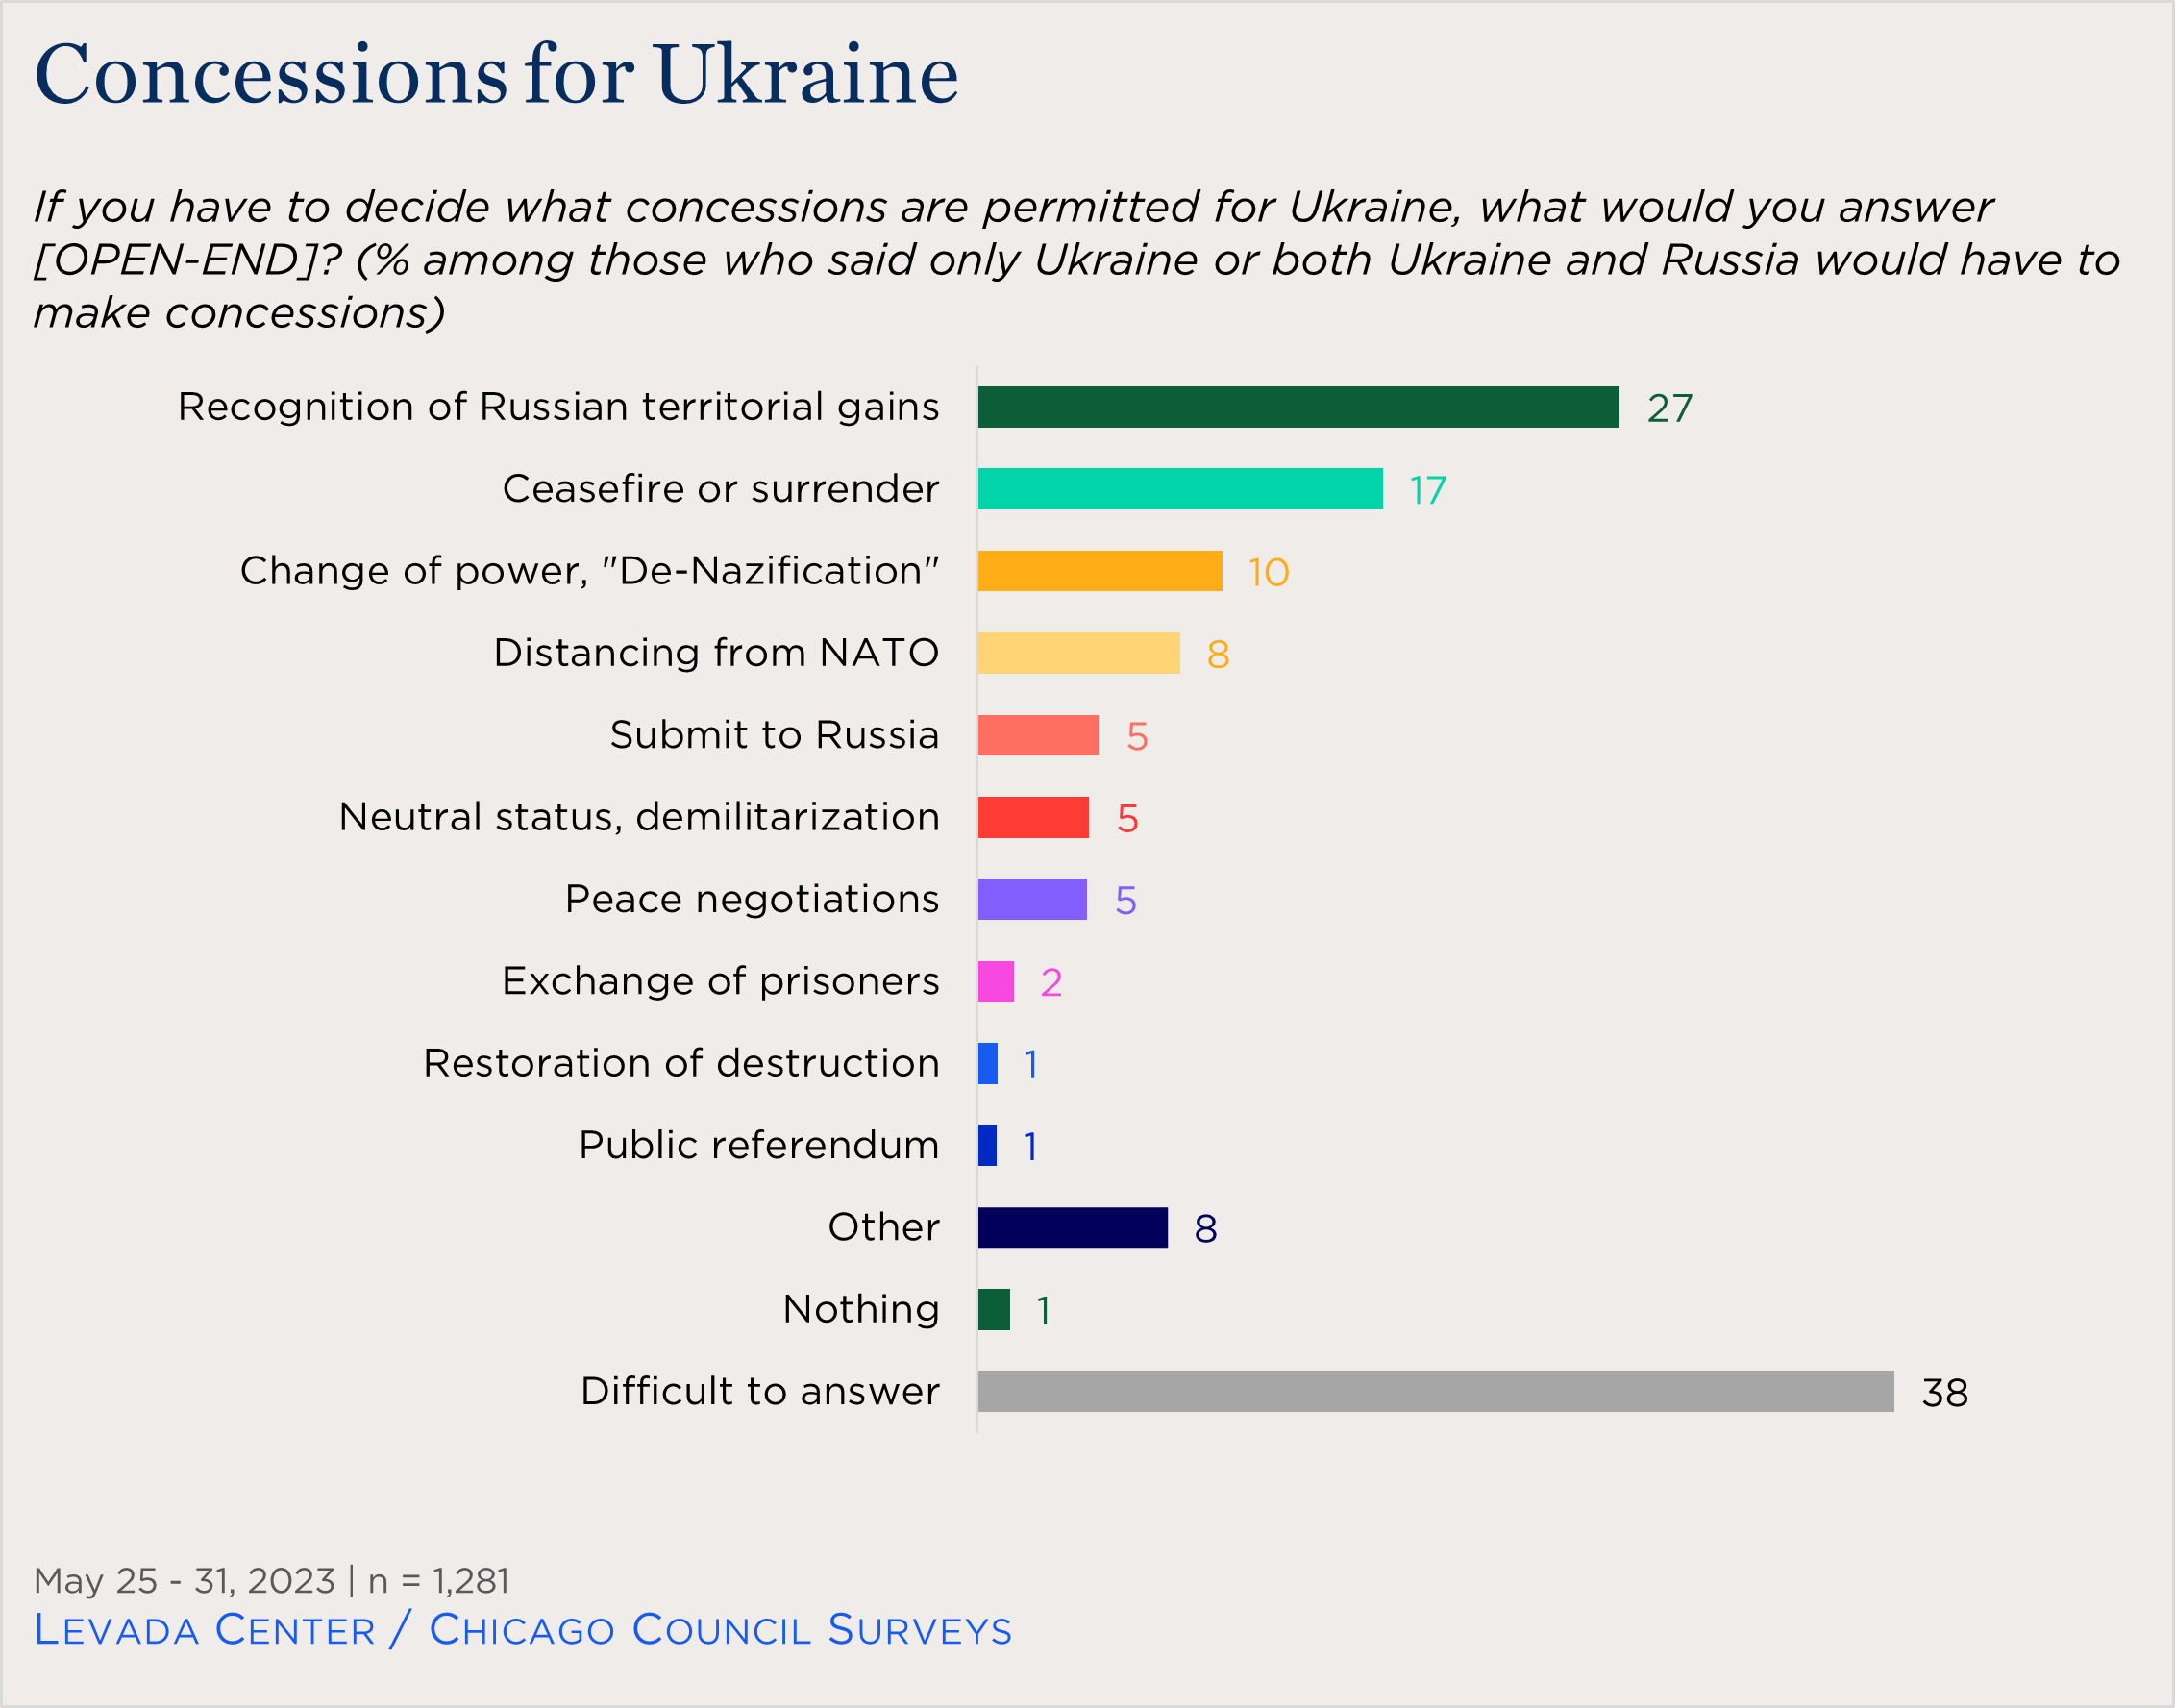 "bar chart showing open-ended responses of Russian views of concessions for Ukraine to end the conflict"